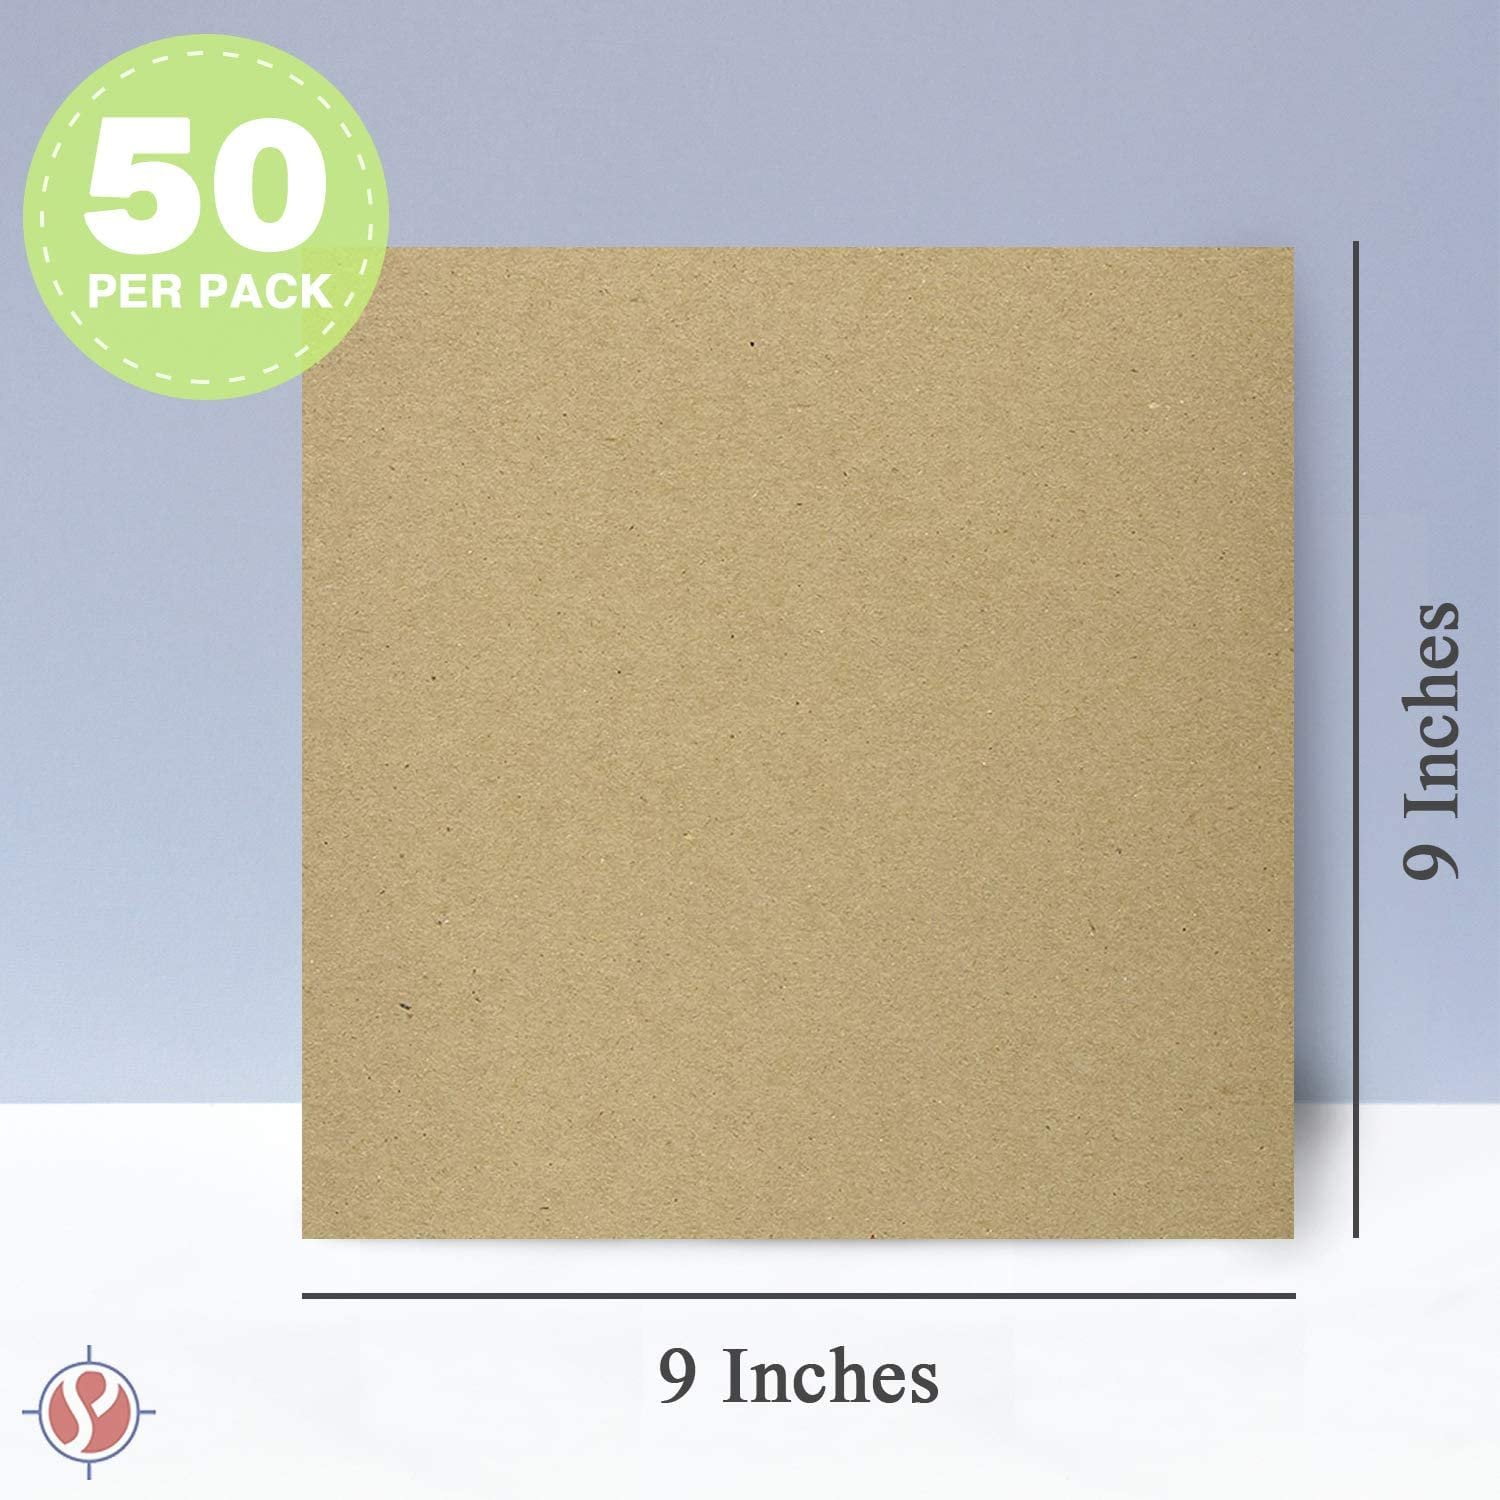 30x30x0.3cm Sheets for Crafting & Woodworking